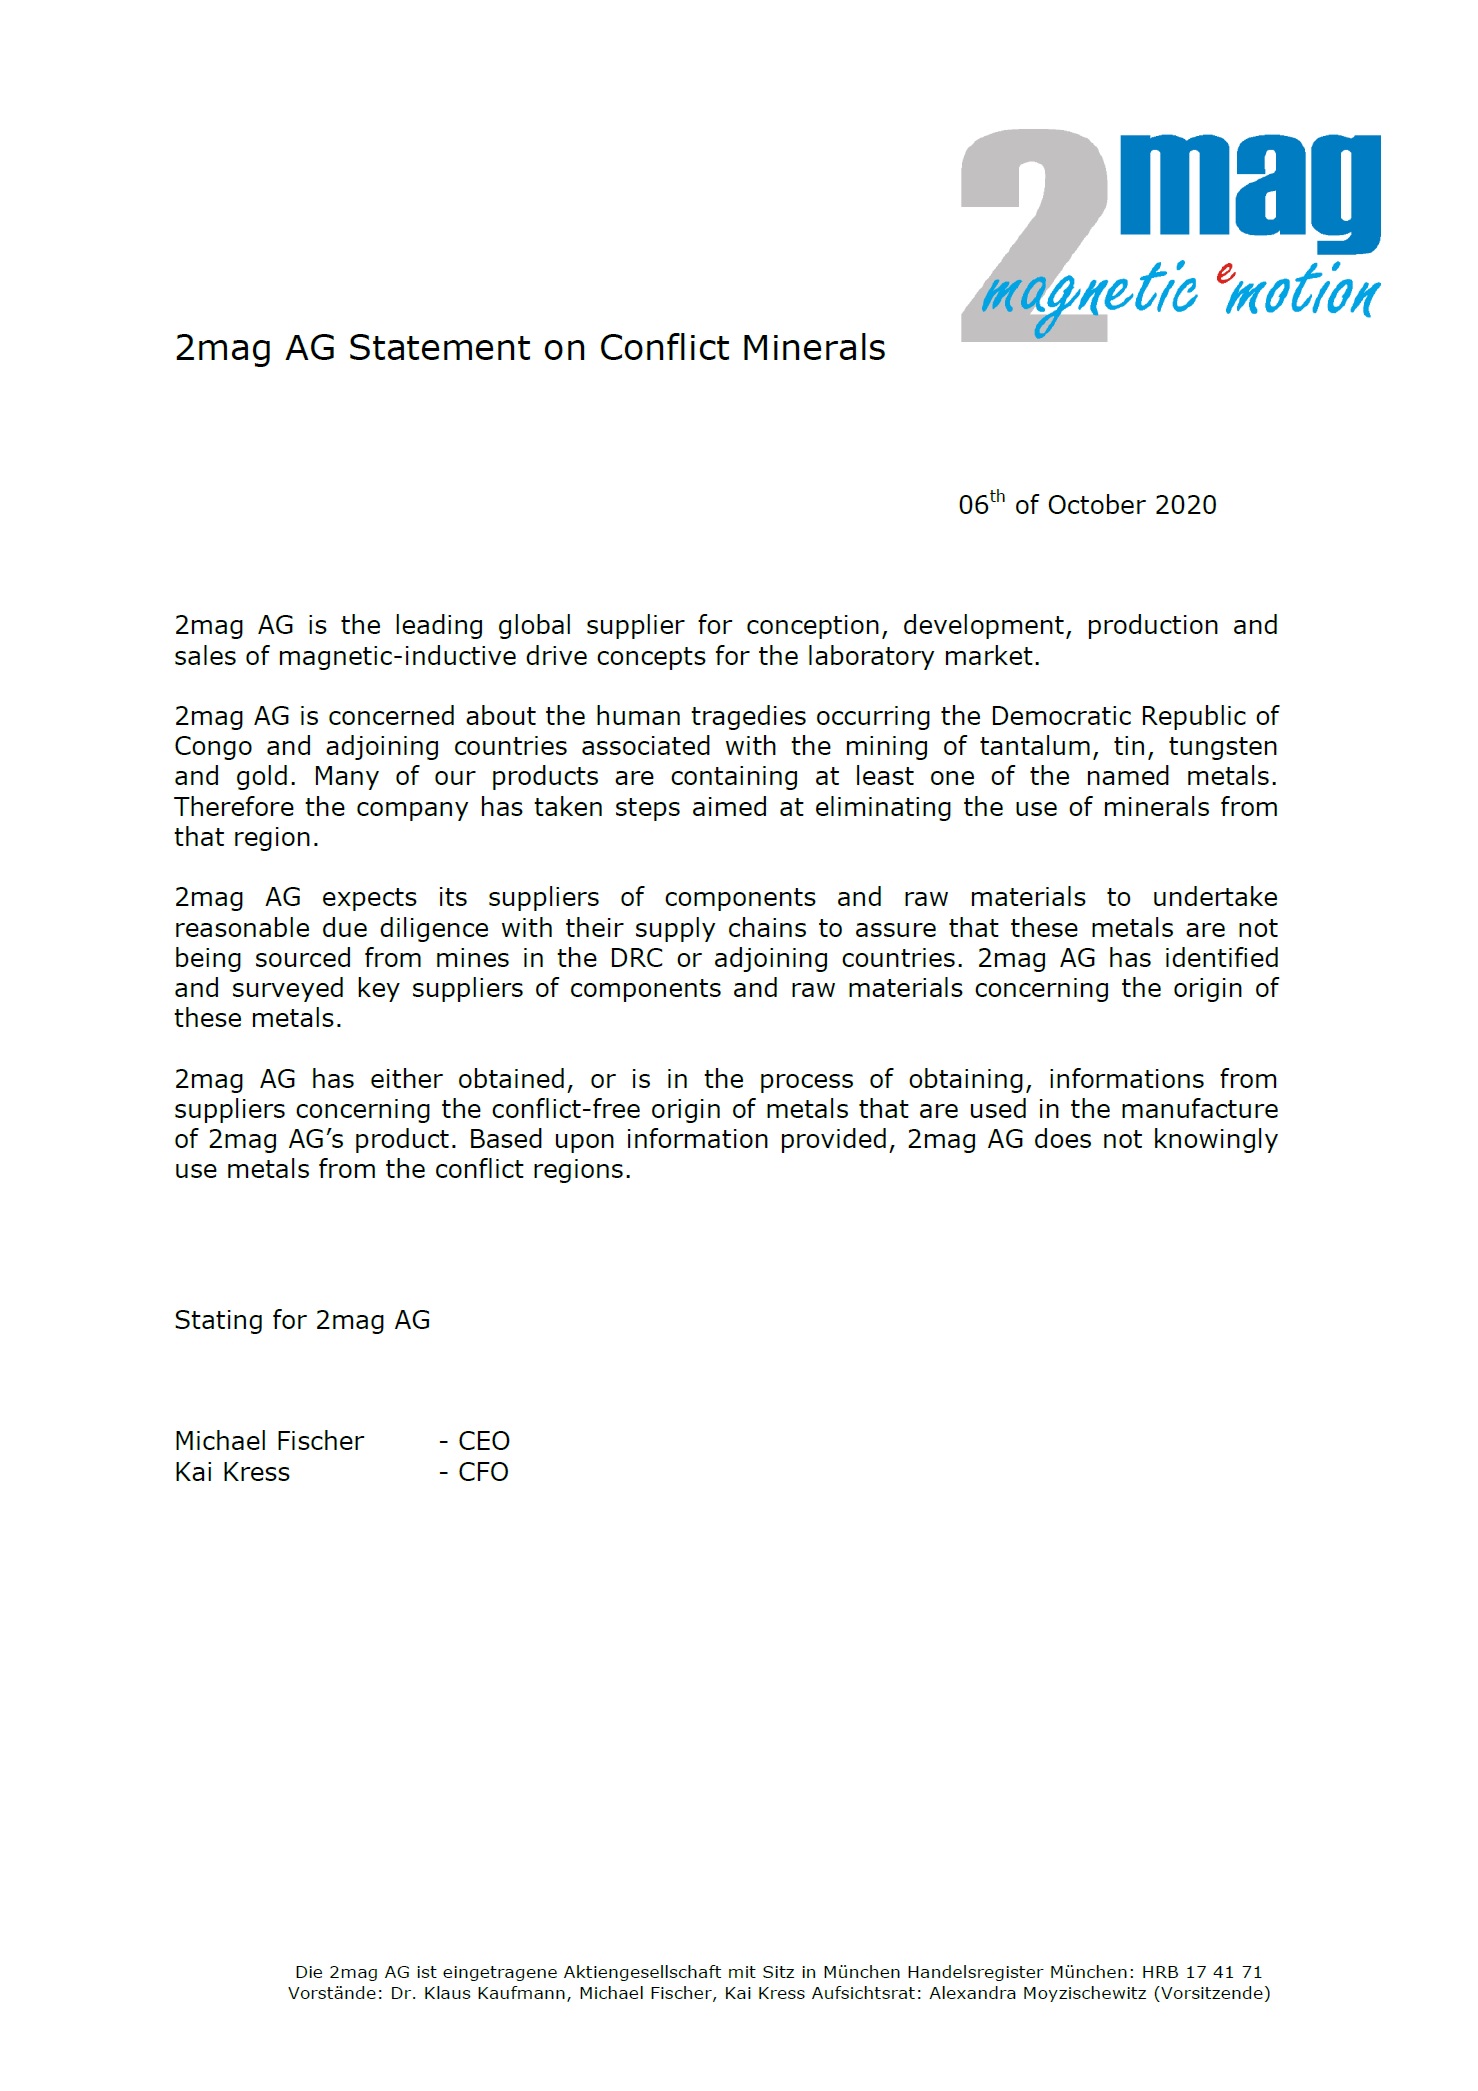 2mag Statement on Conflict Minerals